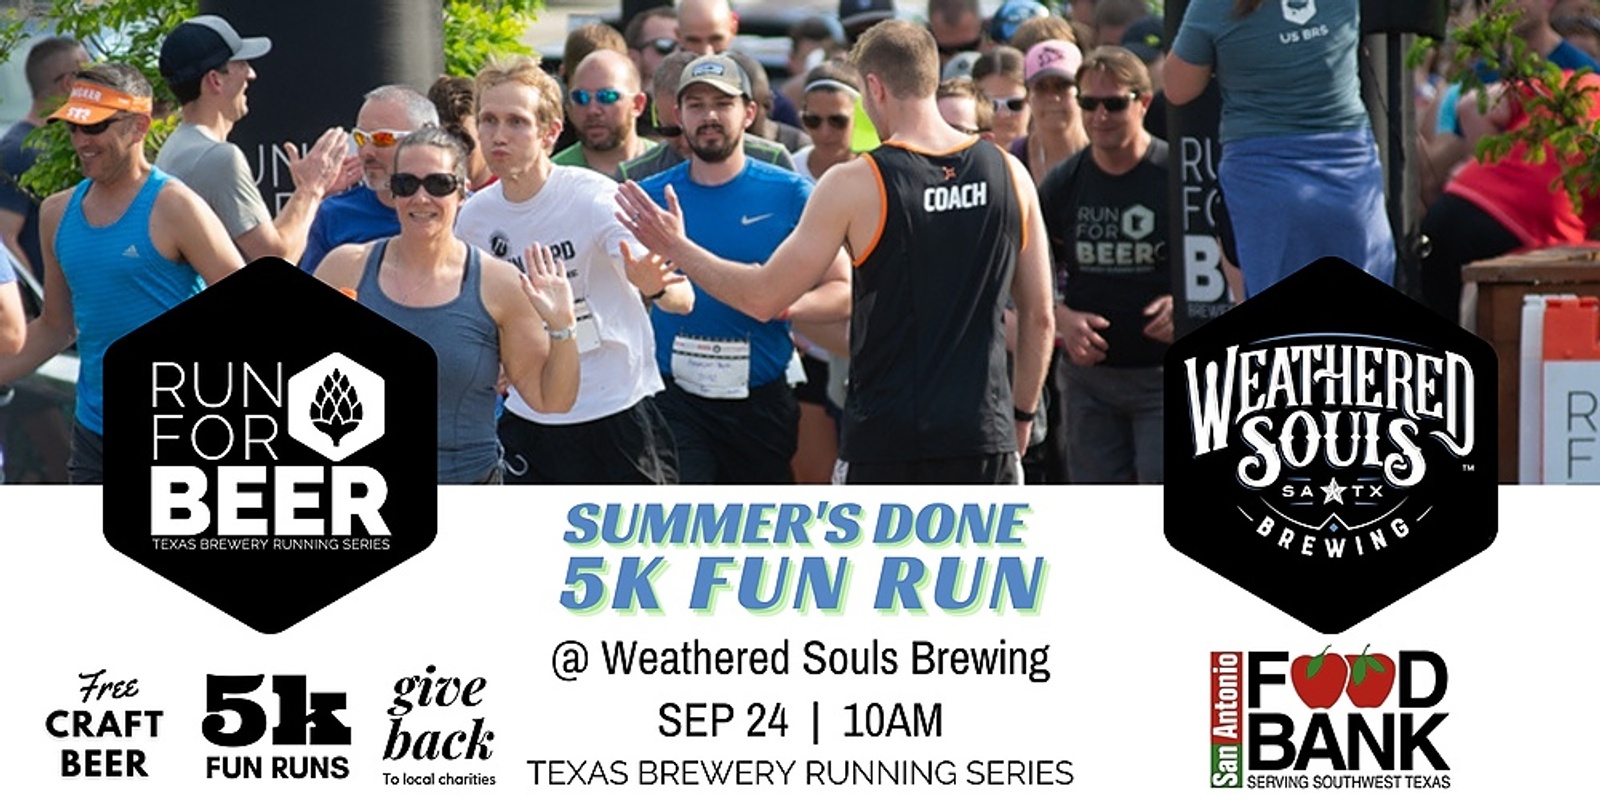 Banner image for 5k Beer Run - Weathered Souls Brewing|2022 TX Brewery Running Series